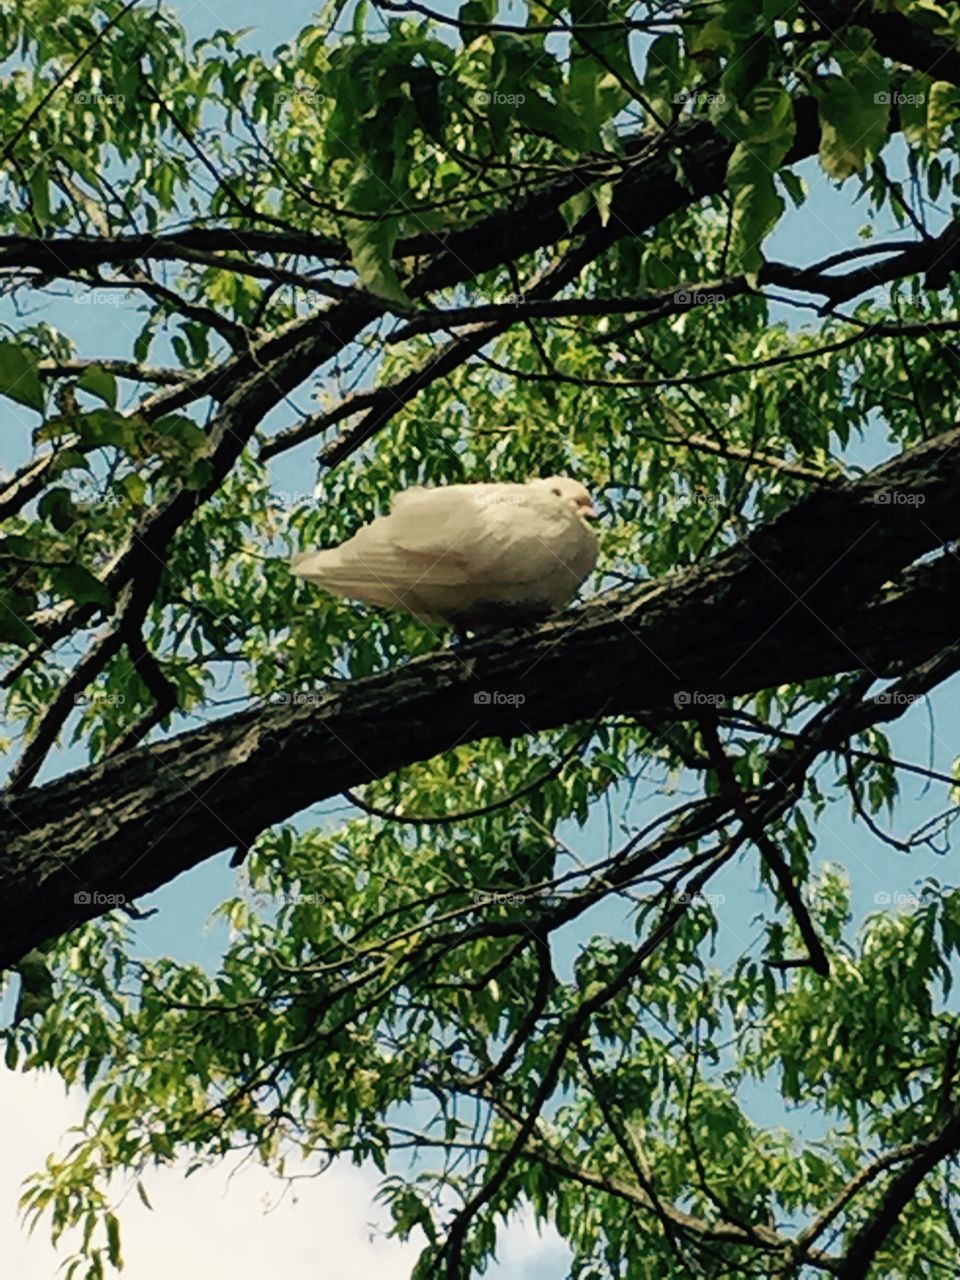 A beautiful white dove in our tree, sky peeking through the branches leafed out with green leaves.